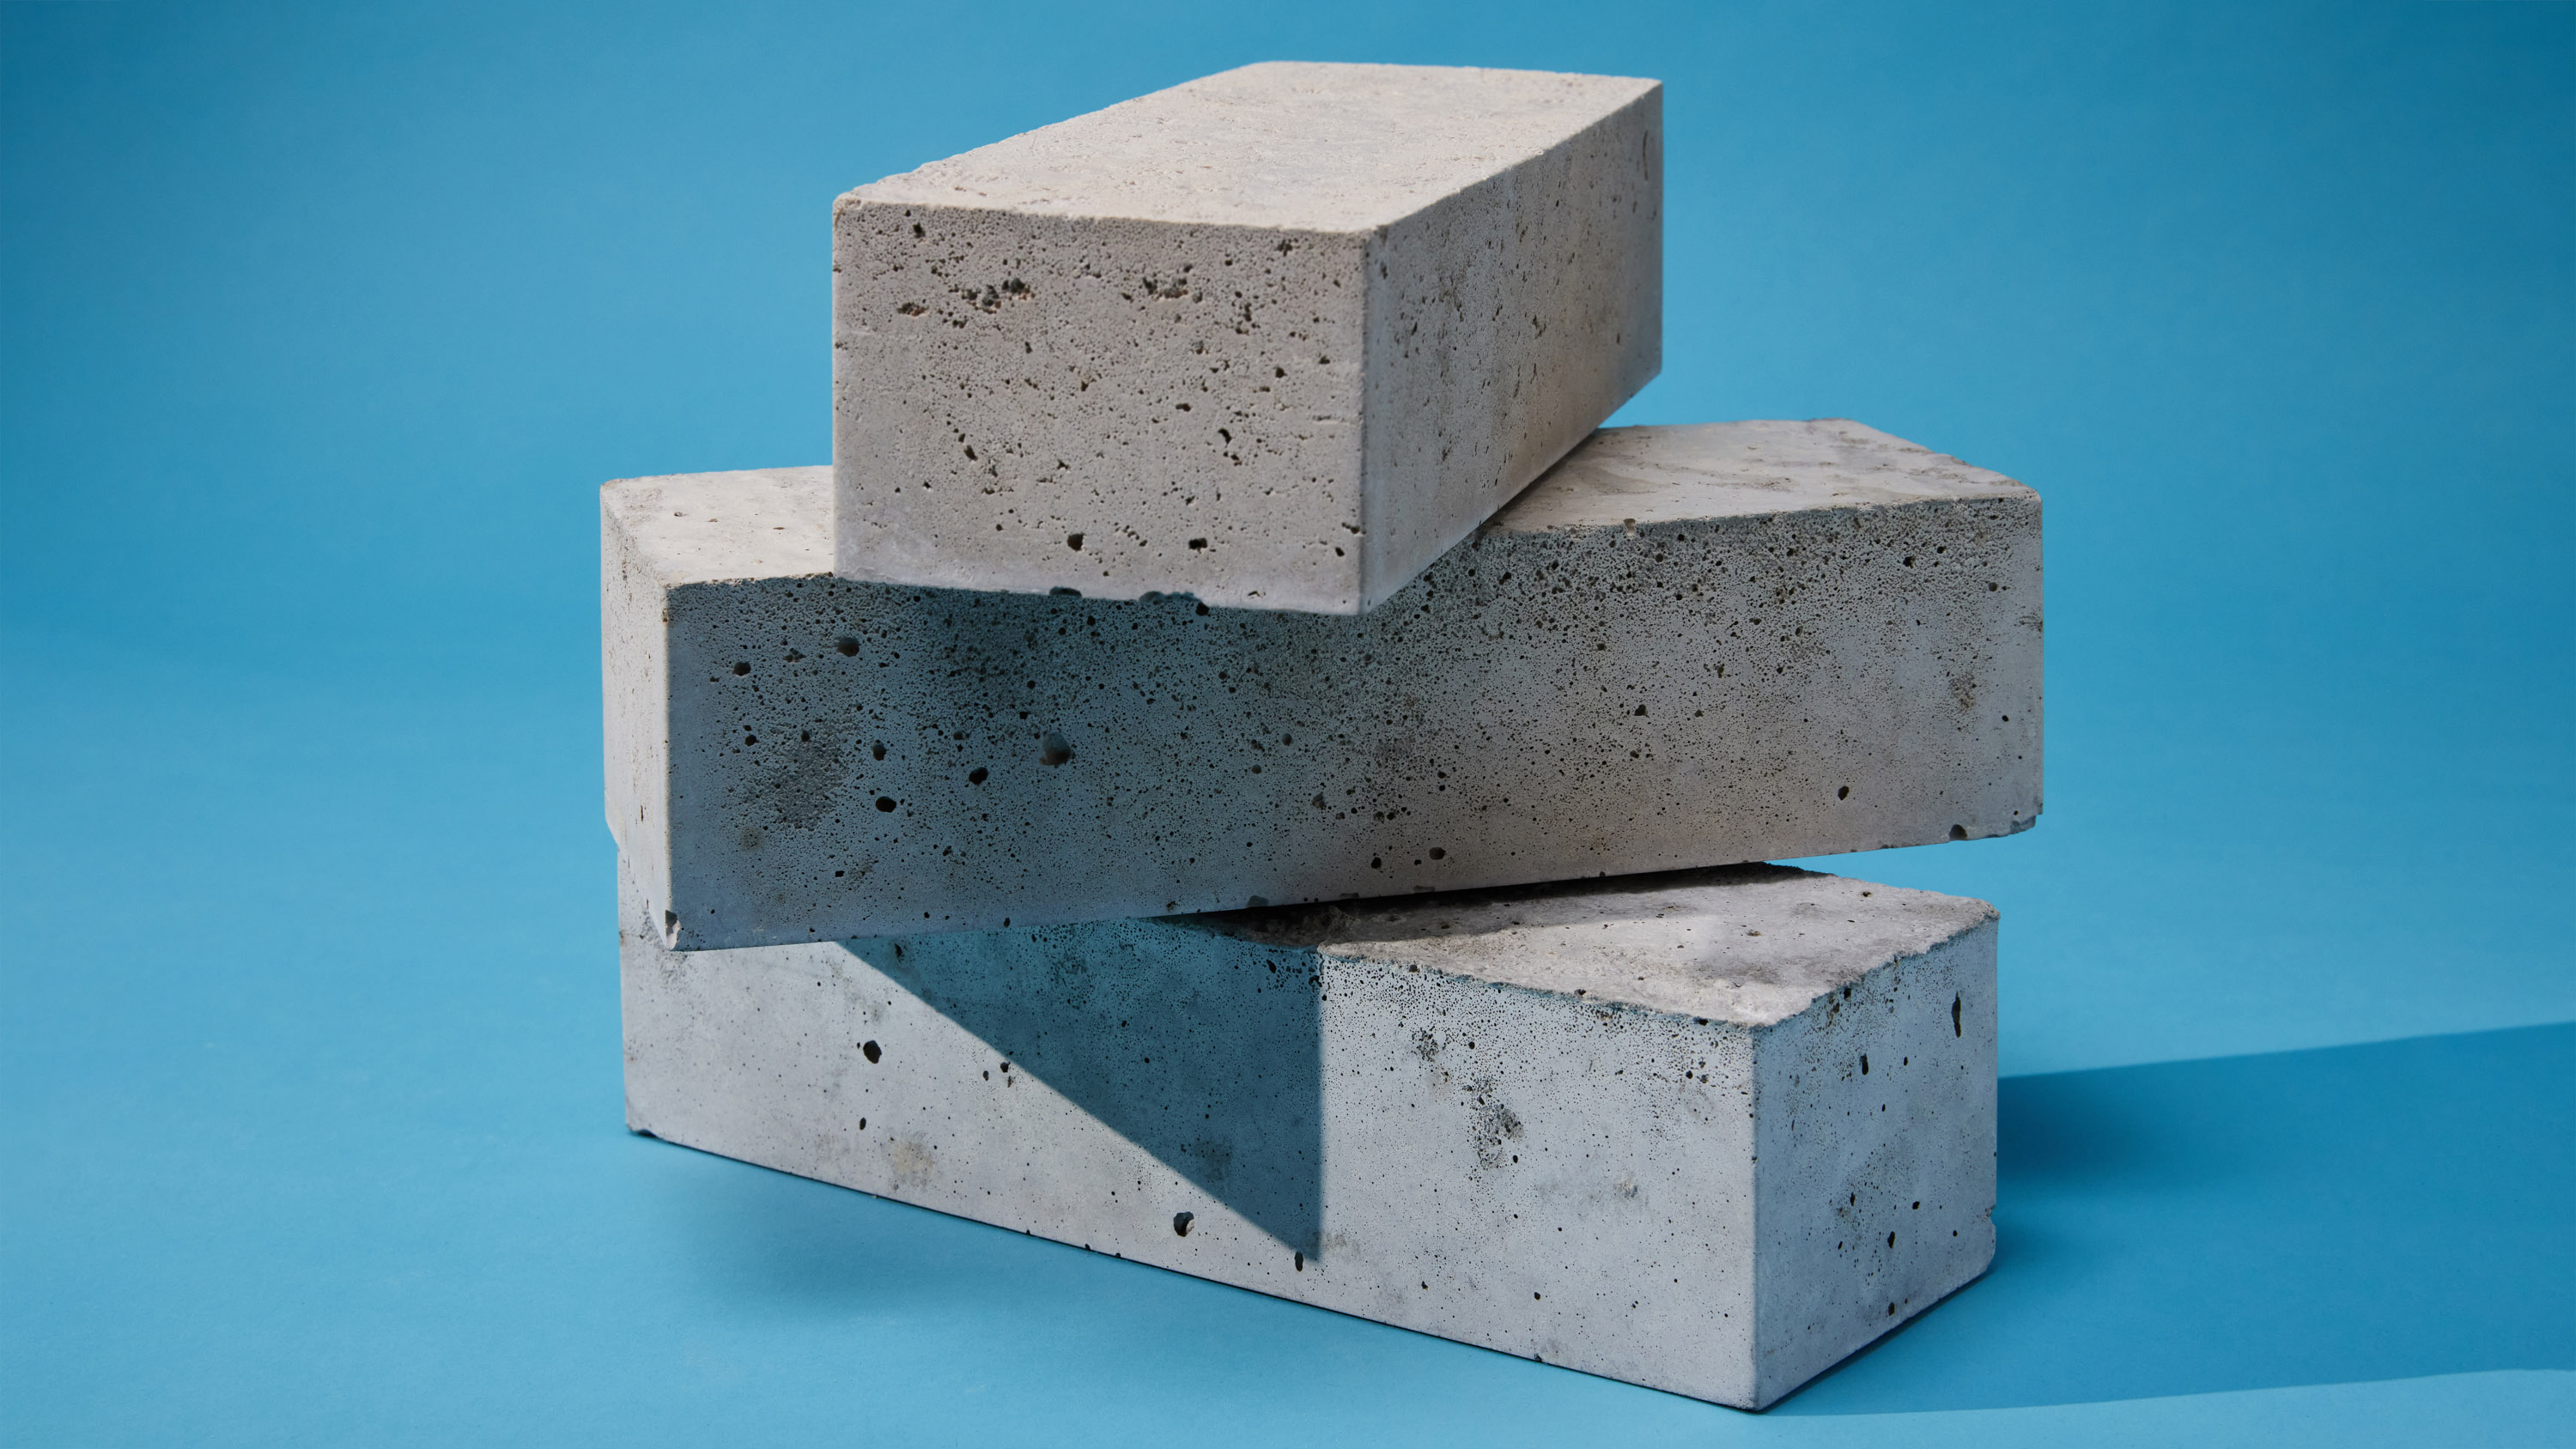 Three cement blocks in a stack